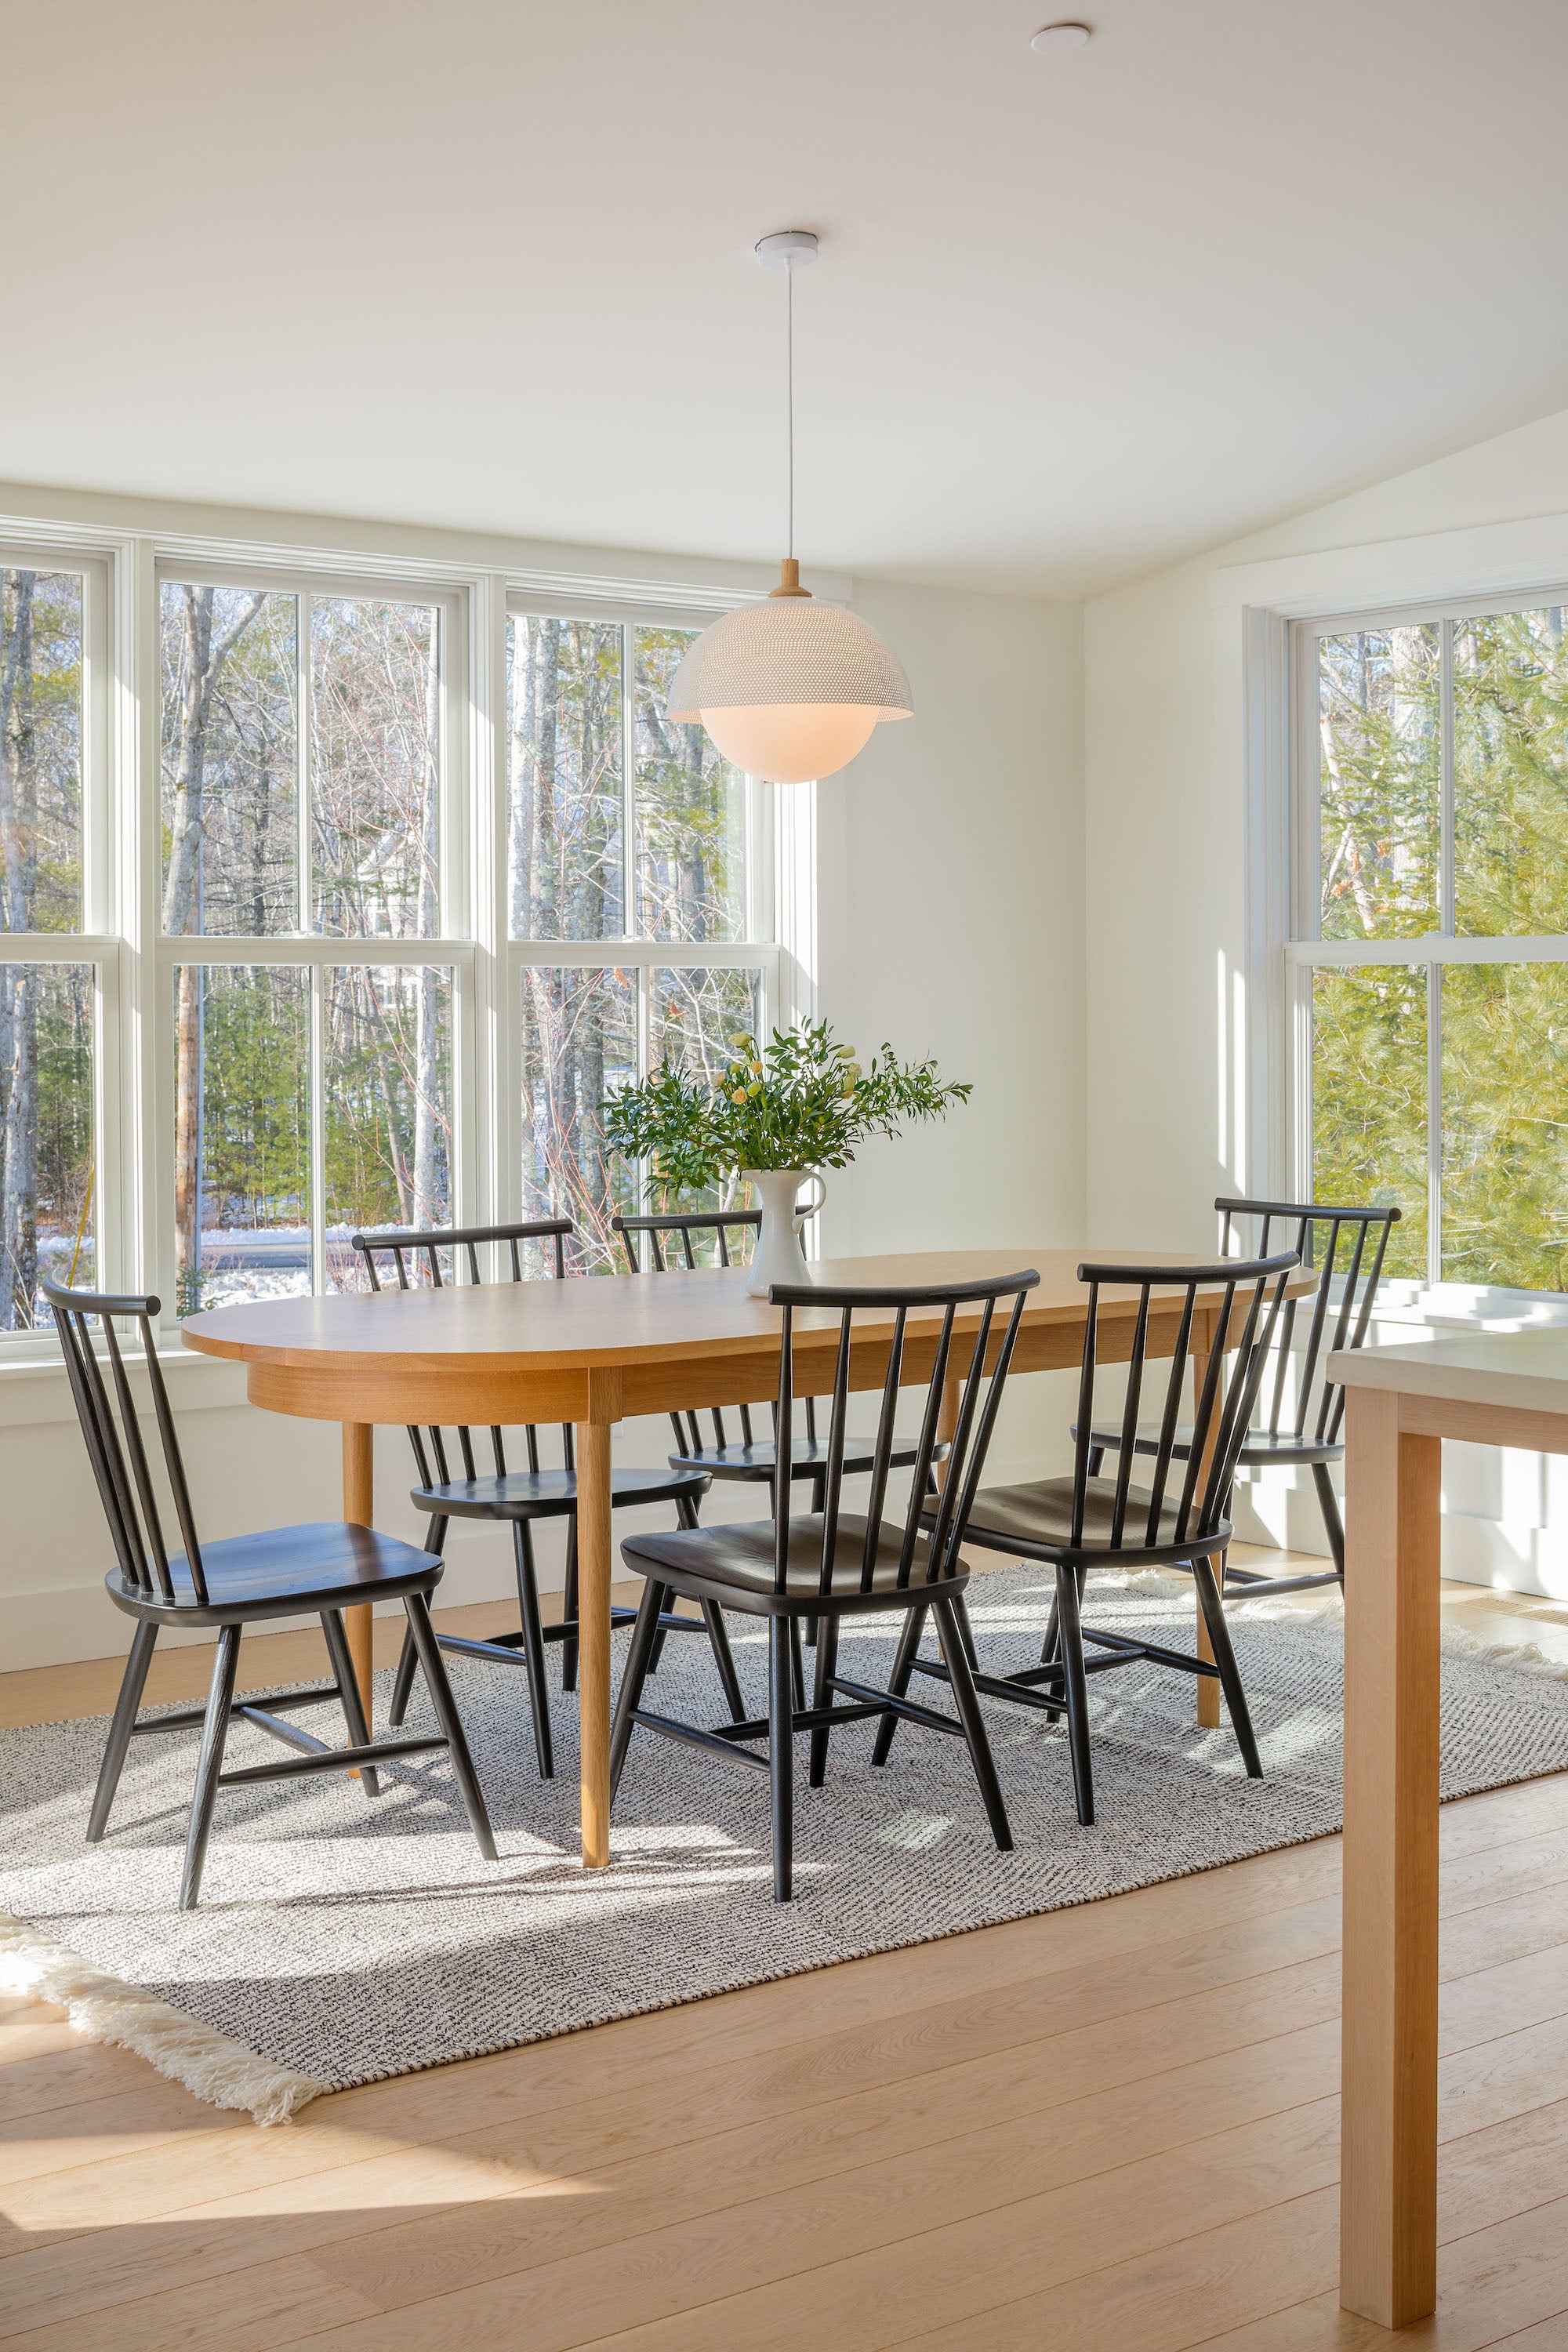 Highland Dining Table with Concord Chairs, photographed by Rachel Sieben